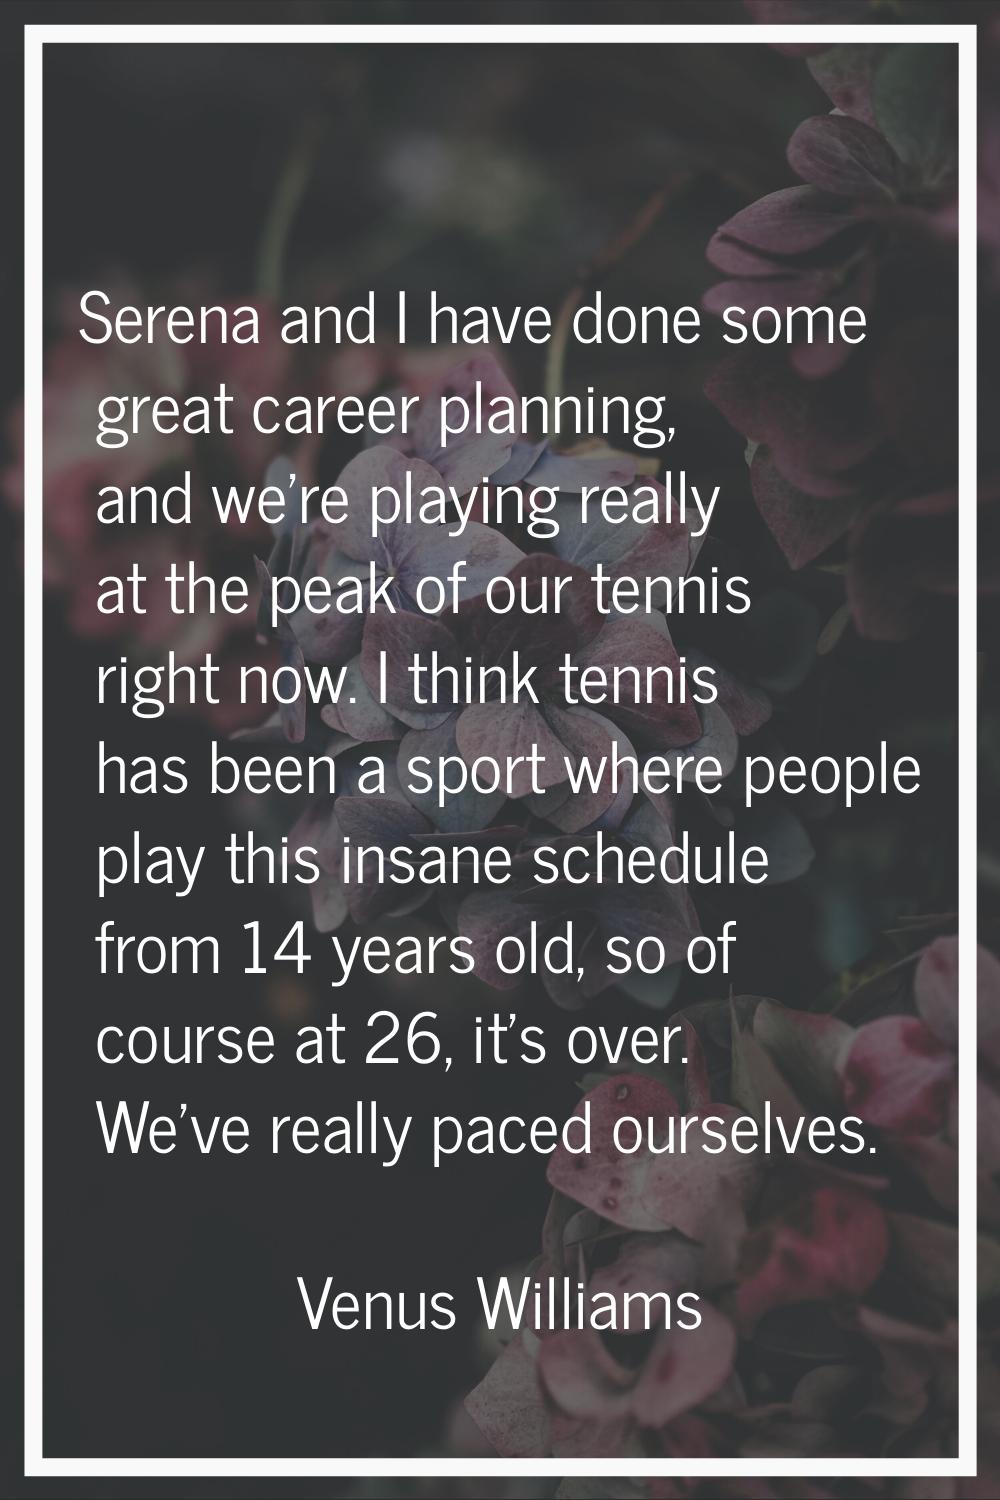 Serena and I have done some great career planning, and we're playing really at the peak of our tenn